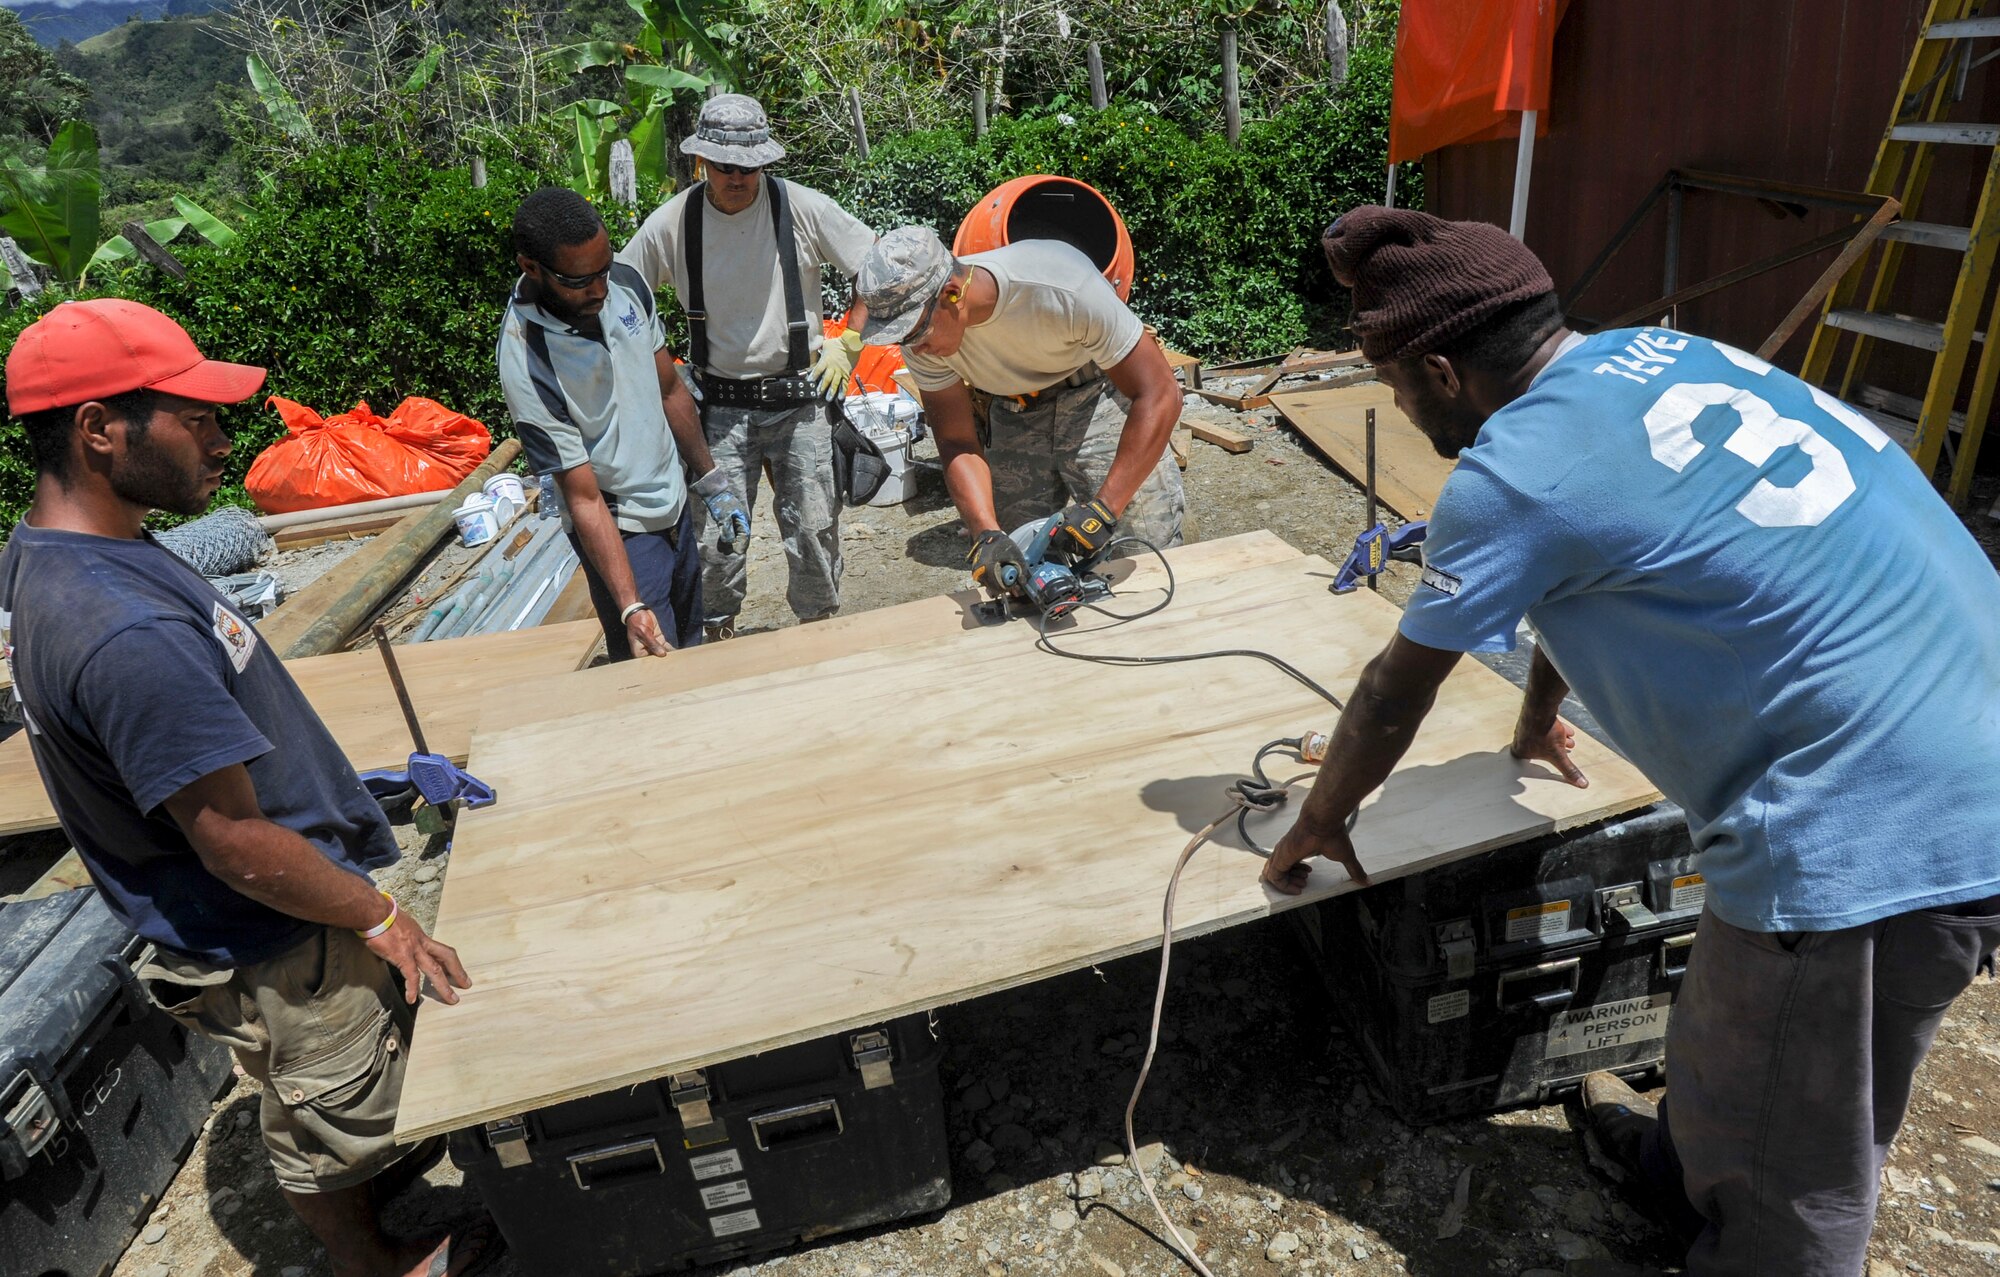 Members of the 154th Civil Engineer Squadron partner with day laborers from the local community to cut pieces of wood for a basketball backboard  Sept. 8, 2014, during Pacific Unity 14-8 in Mount Hagen, Papua New Guinea. Pacific Unity is a bilateral Engineering Civic Action Program conducted in the Asia-Pacific region in collaboration with host nation civil authorities and military service members that build upon previous engagements and exercises, and continue to mature U.S. and Asia-Pacific civil-military interoperability. The Airmen are deployed from the Hawaii Air National Guard. (U.S. Air Force photo/Tech. Sgt. Terri Paden)                           